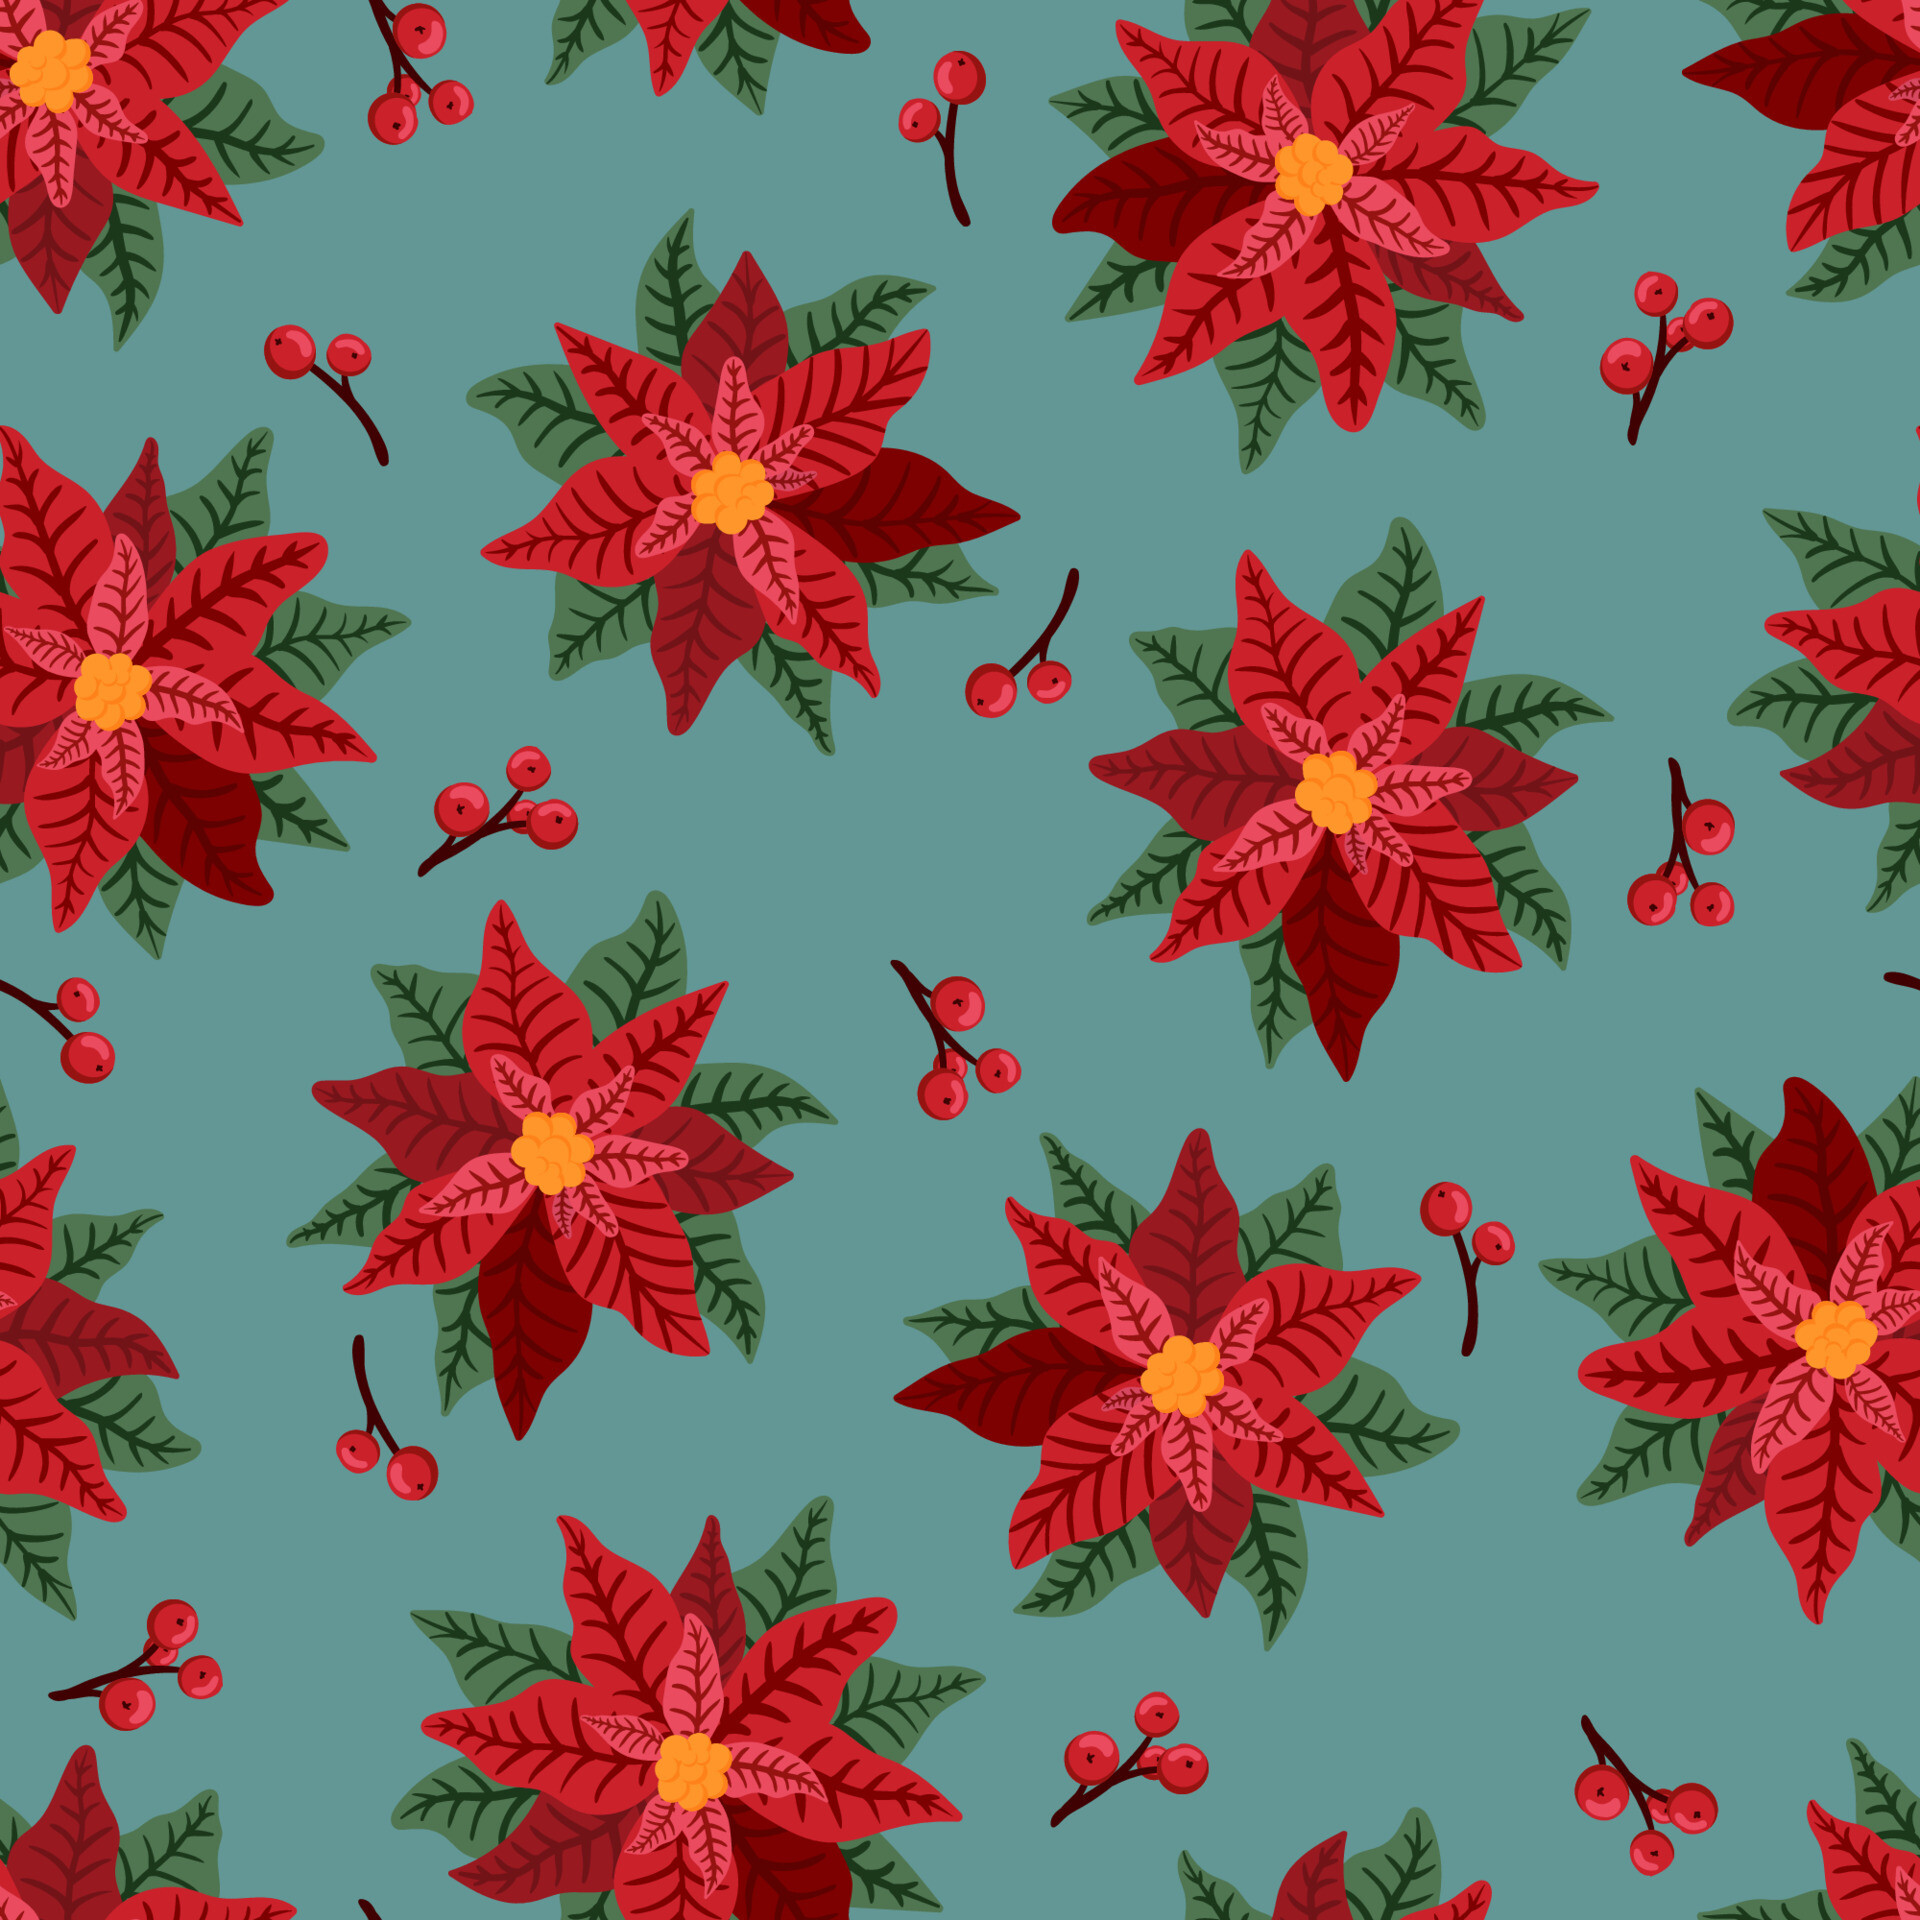 Poinsettia: Aztec people use the plant to produce red dye and as an antipyretic medication. 1920x1920 HD Wallpaper.